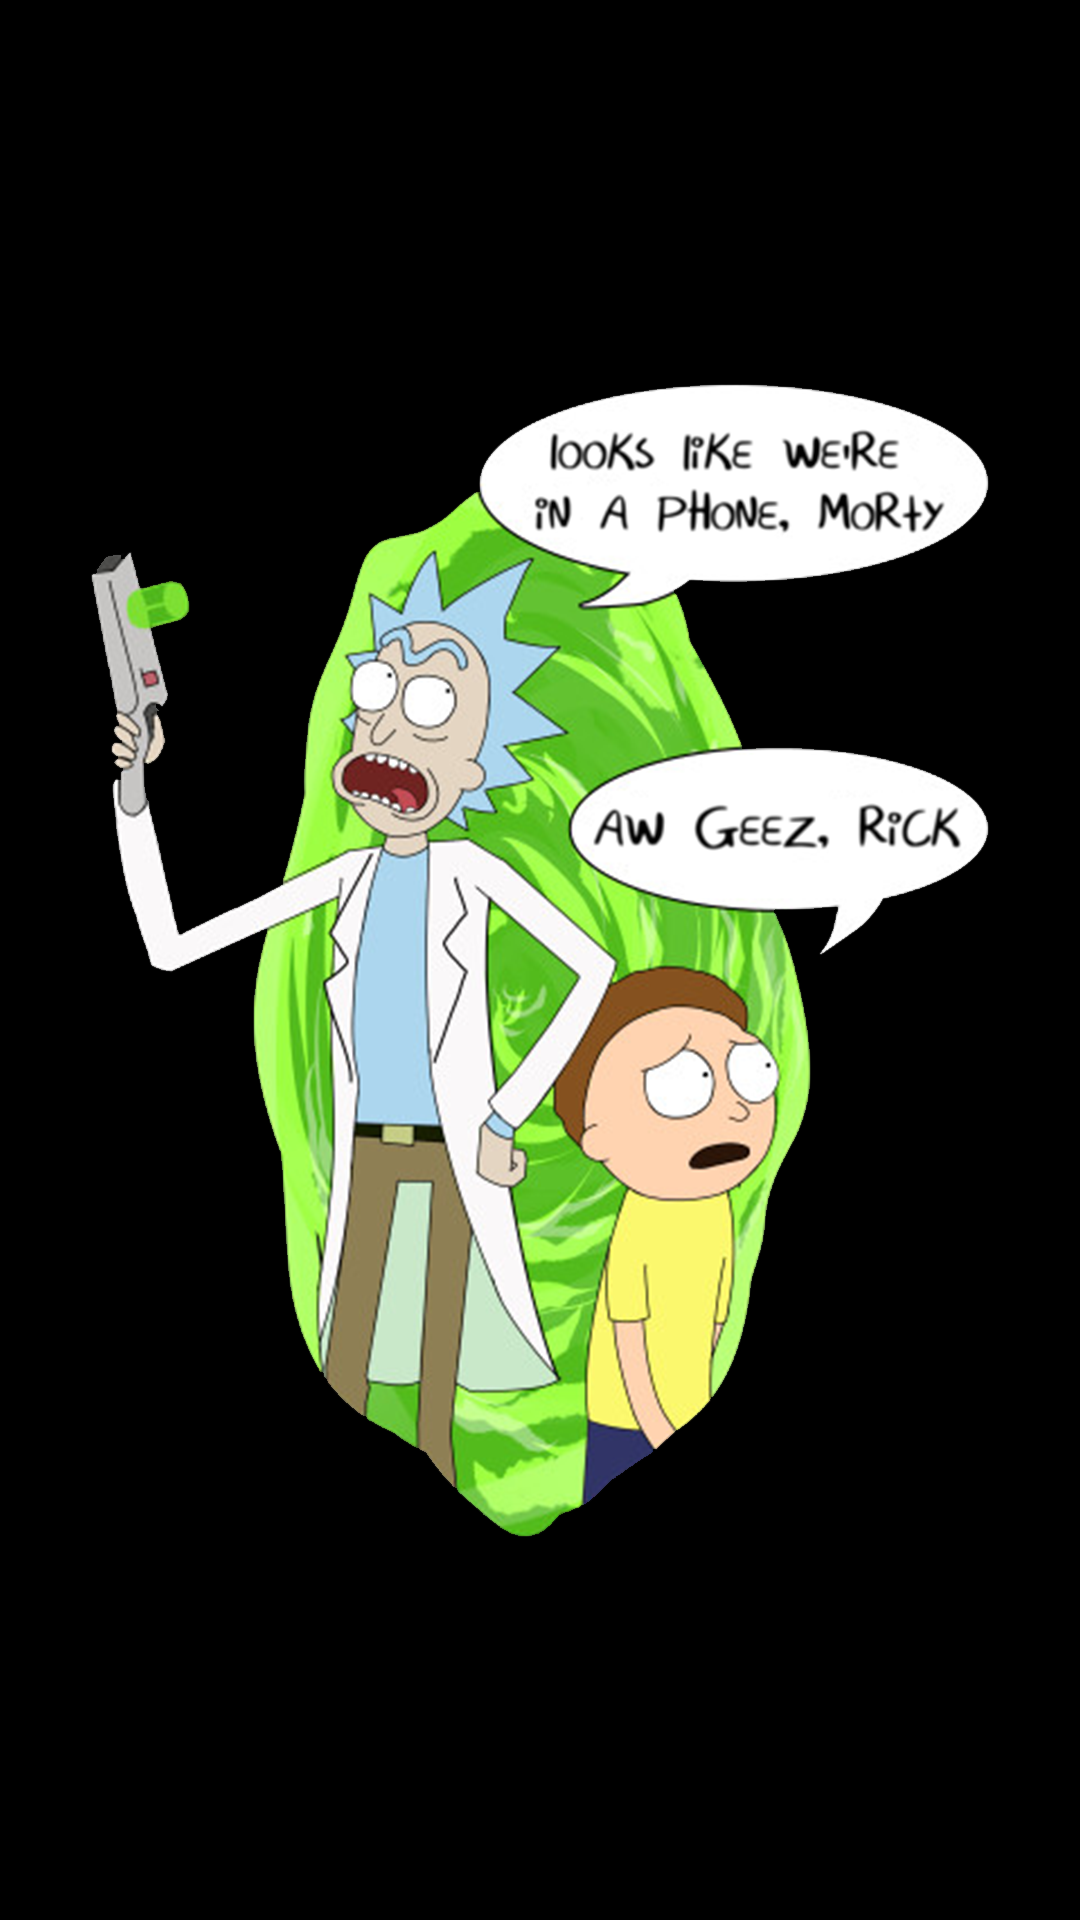 Amoled rick and morty x alternative s size in ment rverticalwallpapers